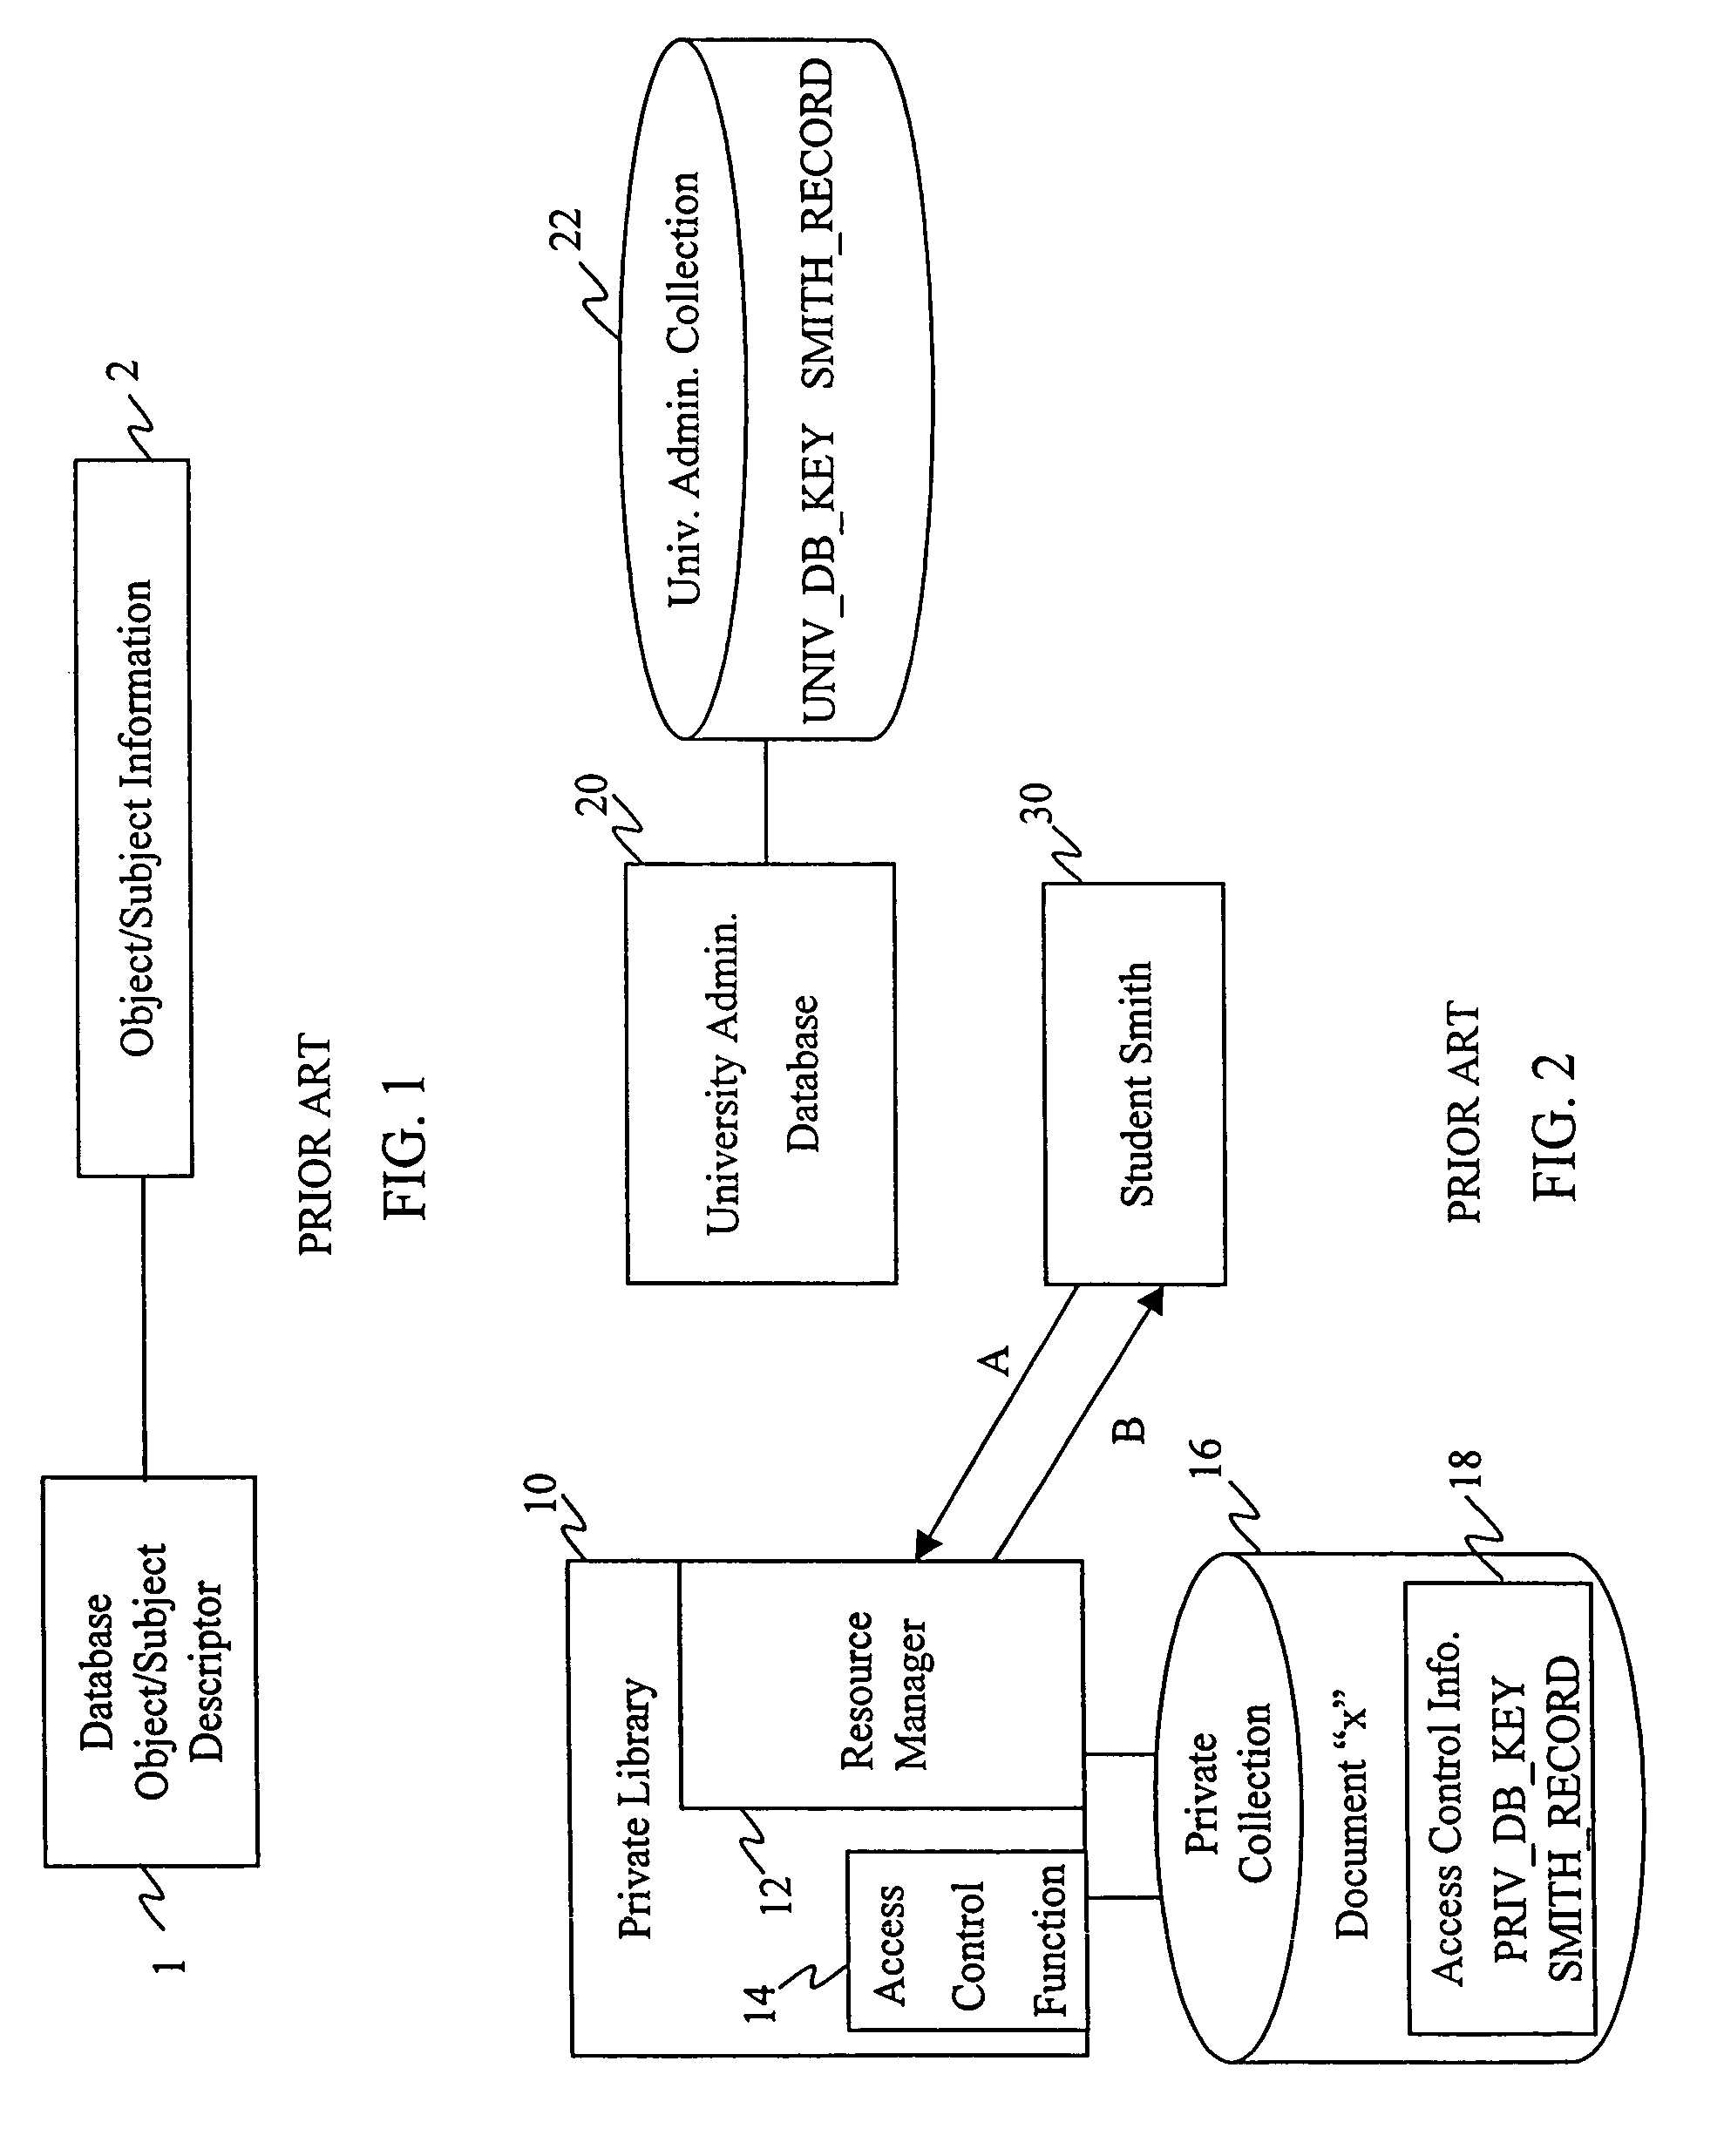 Distributed data structures for authorization and access control for computing resources